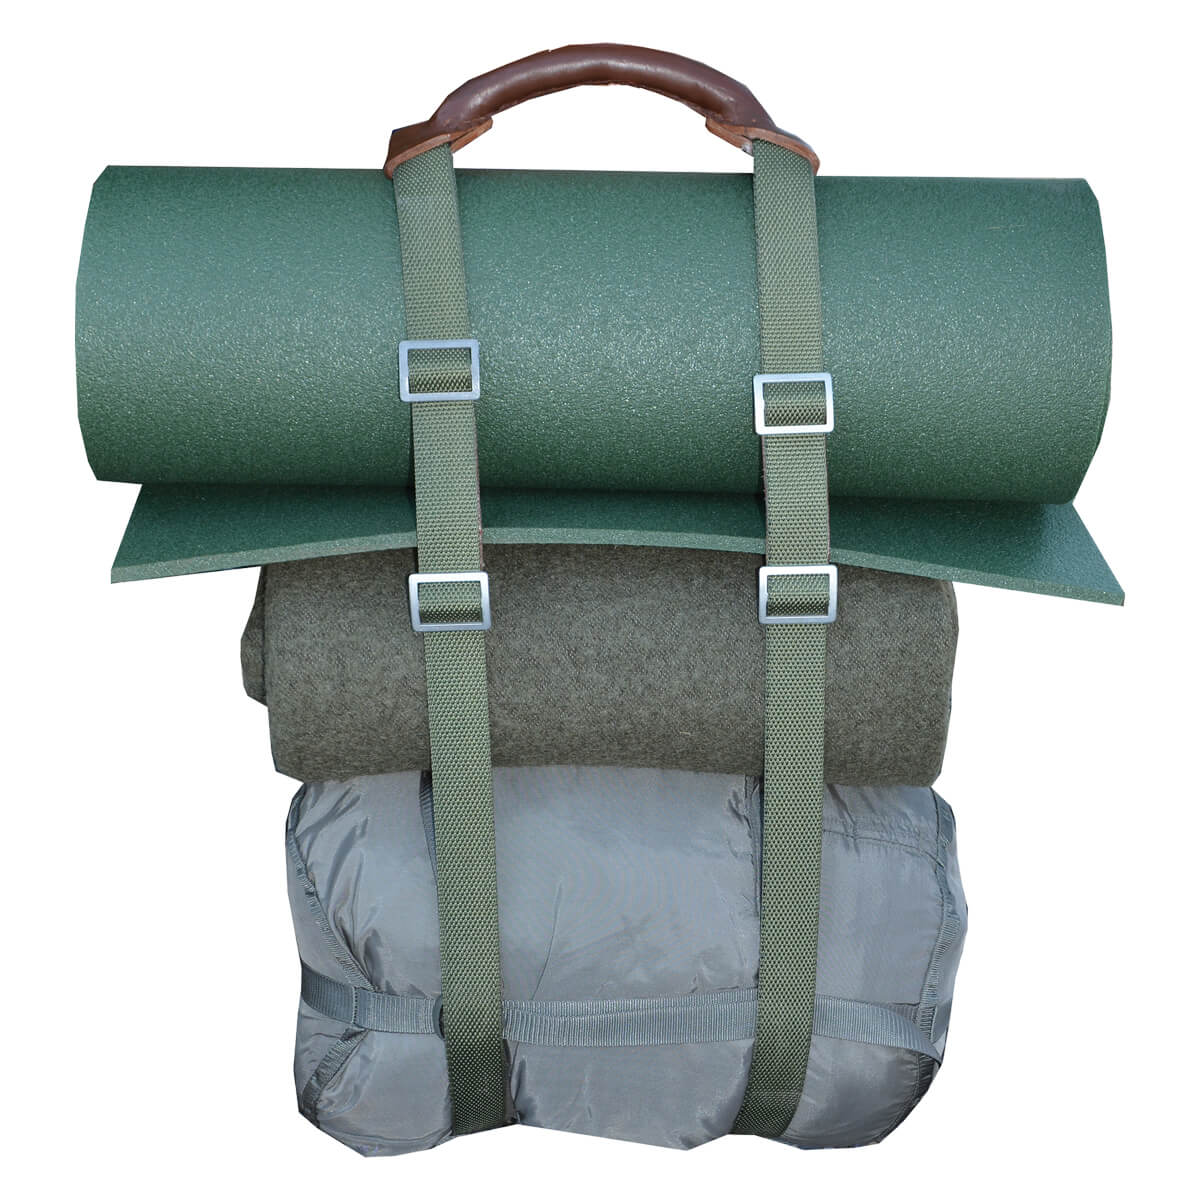 Polish carry handle for tent and backpack camping